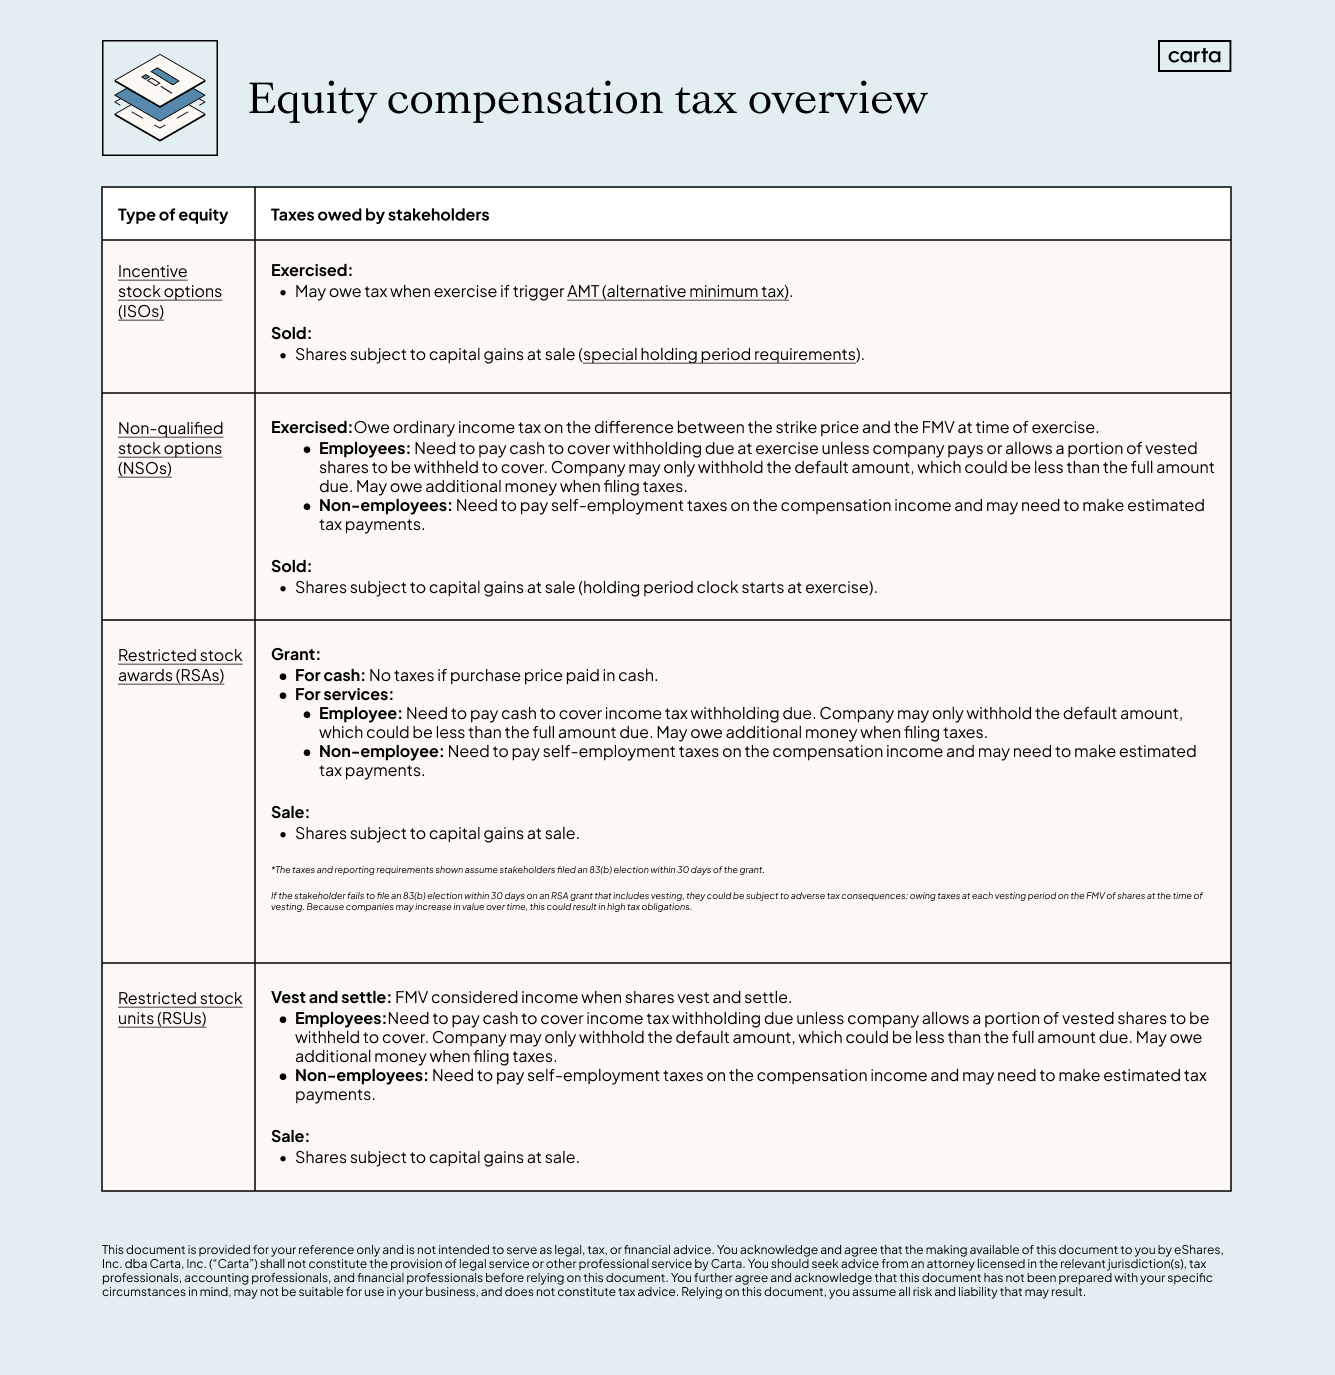 equity compensation tax overview